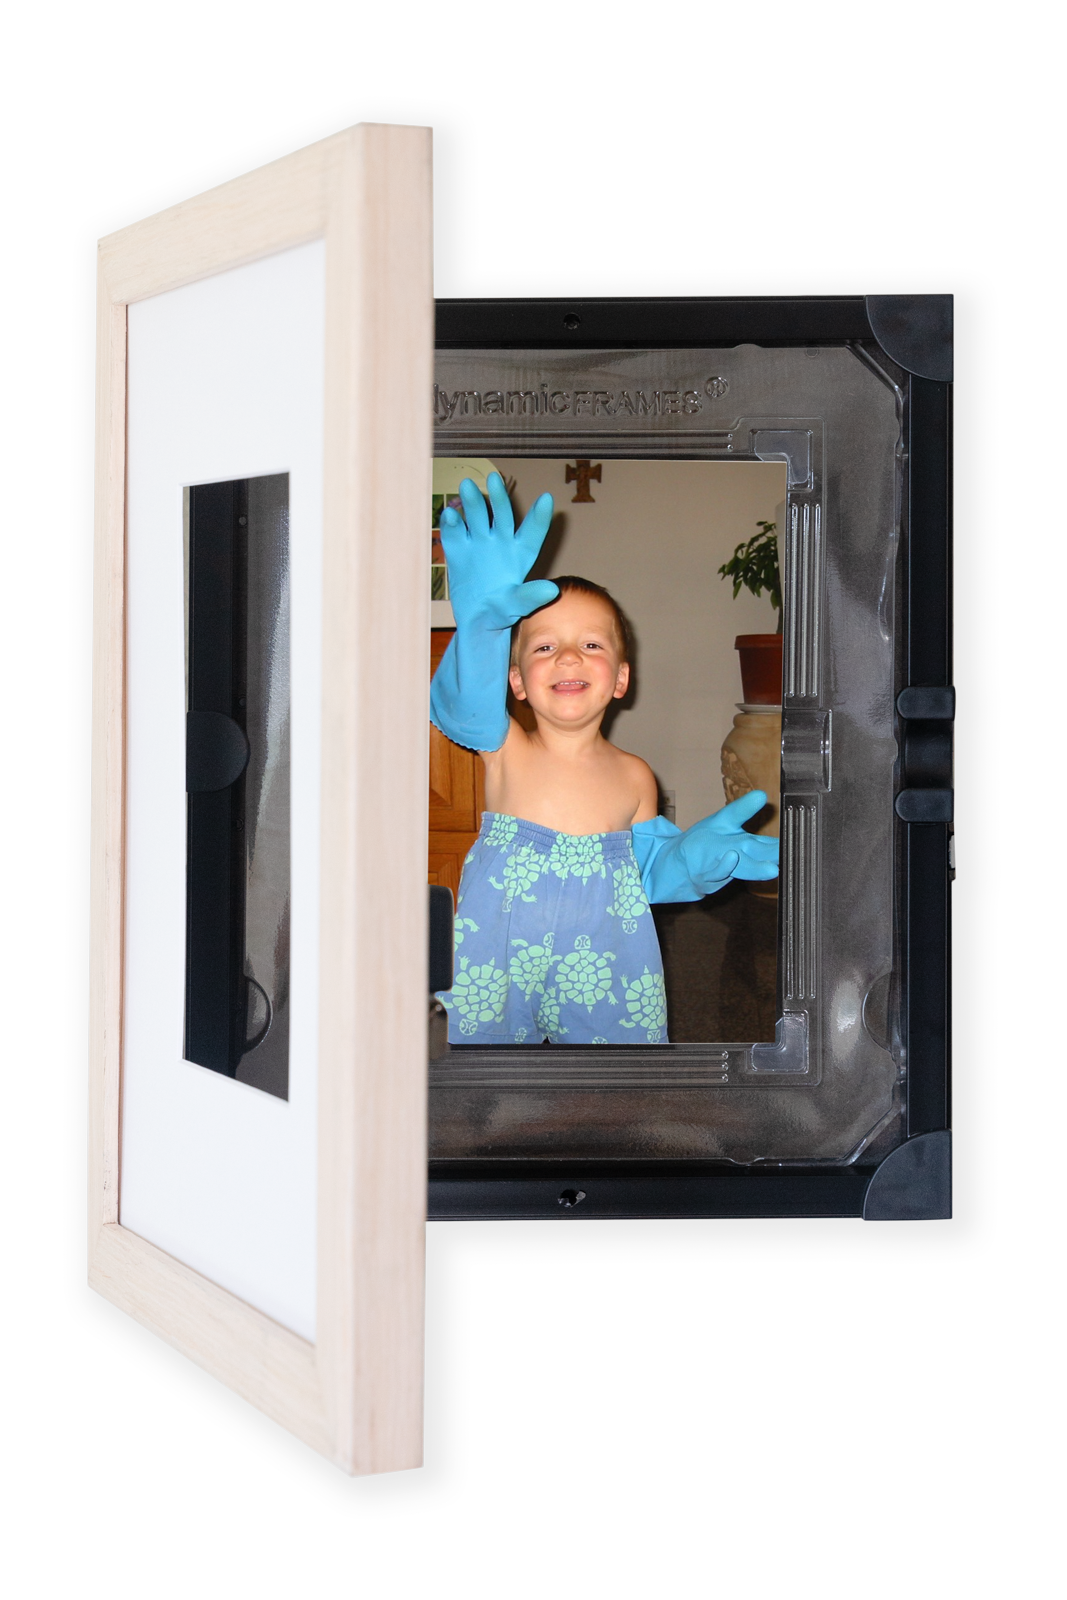 Dynamic Duo - 1 frame for either 8x10 - 5x7 photos.